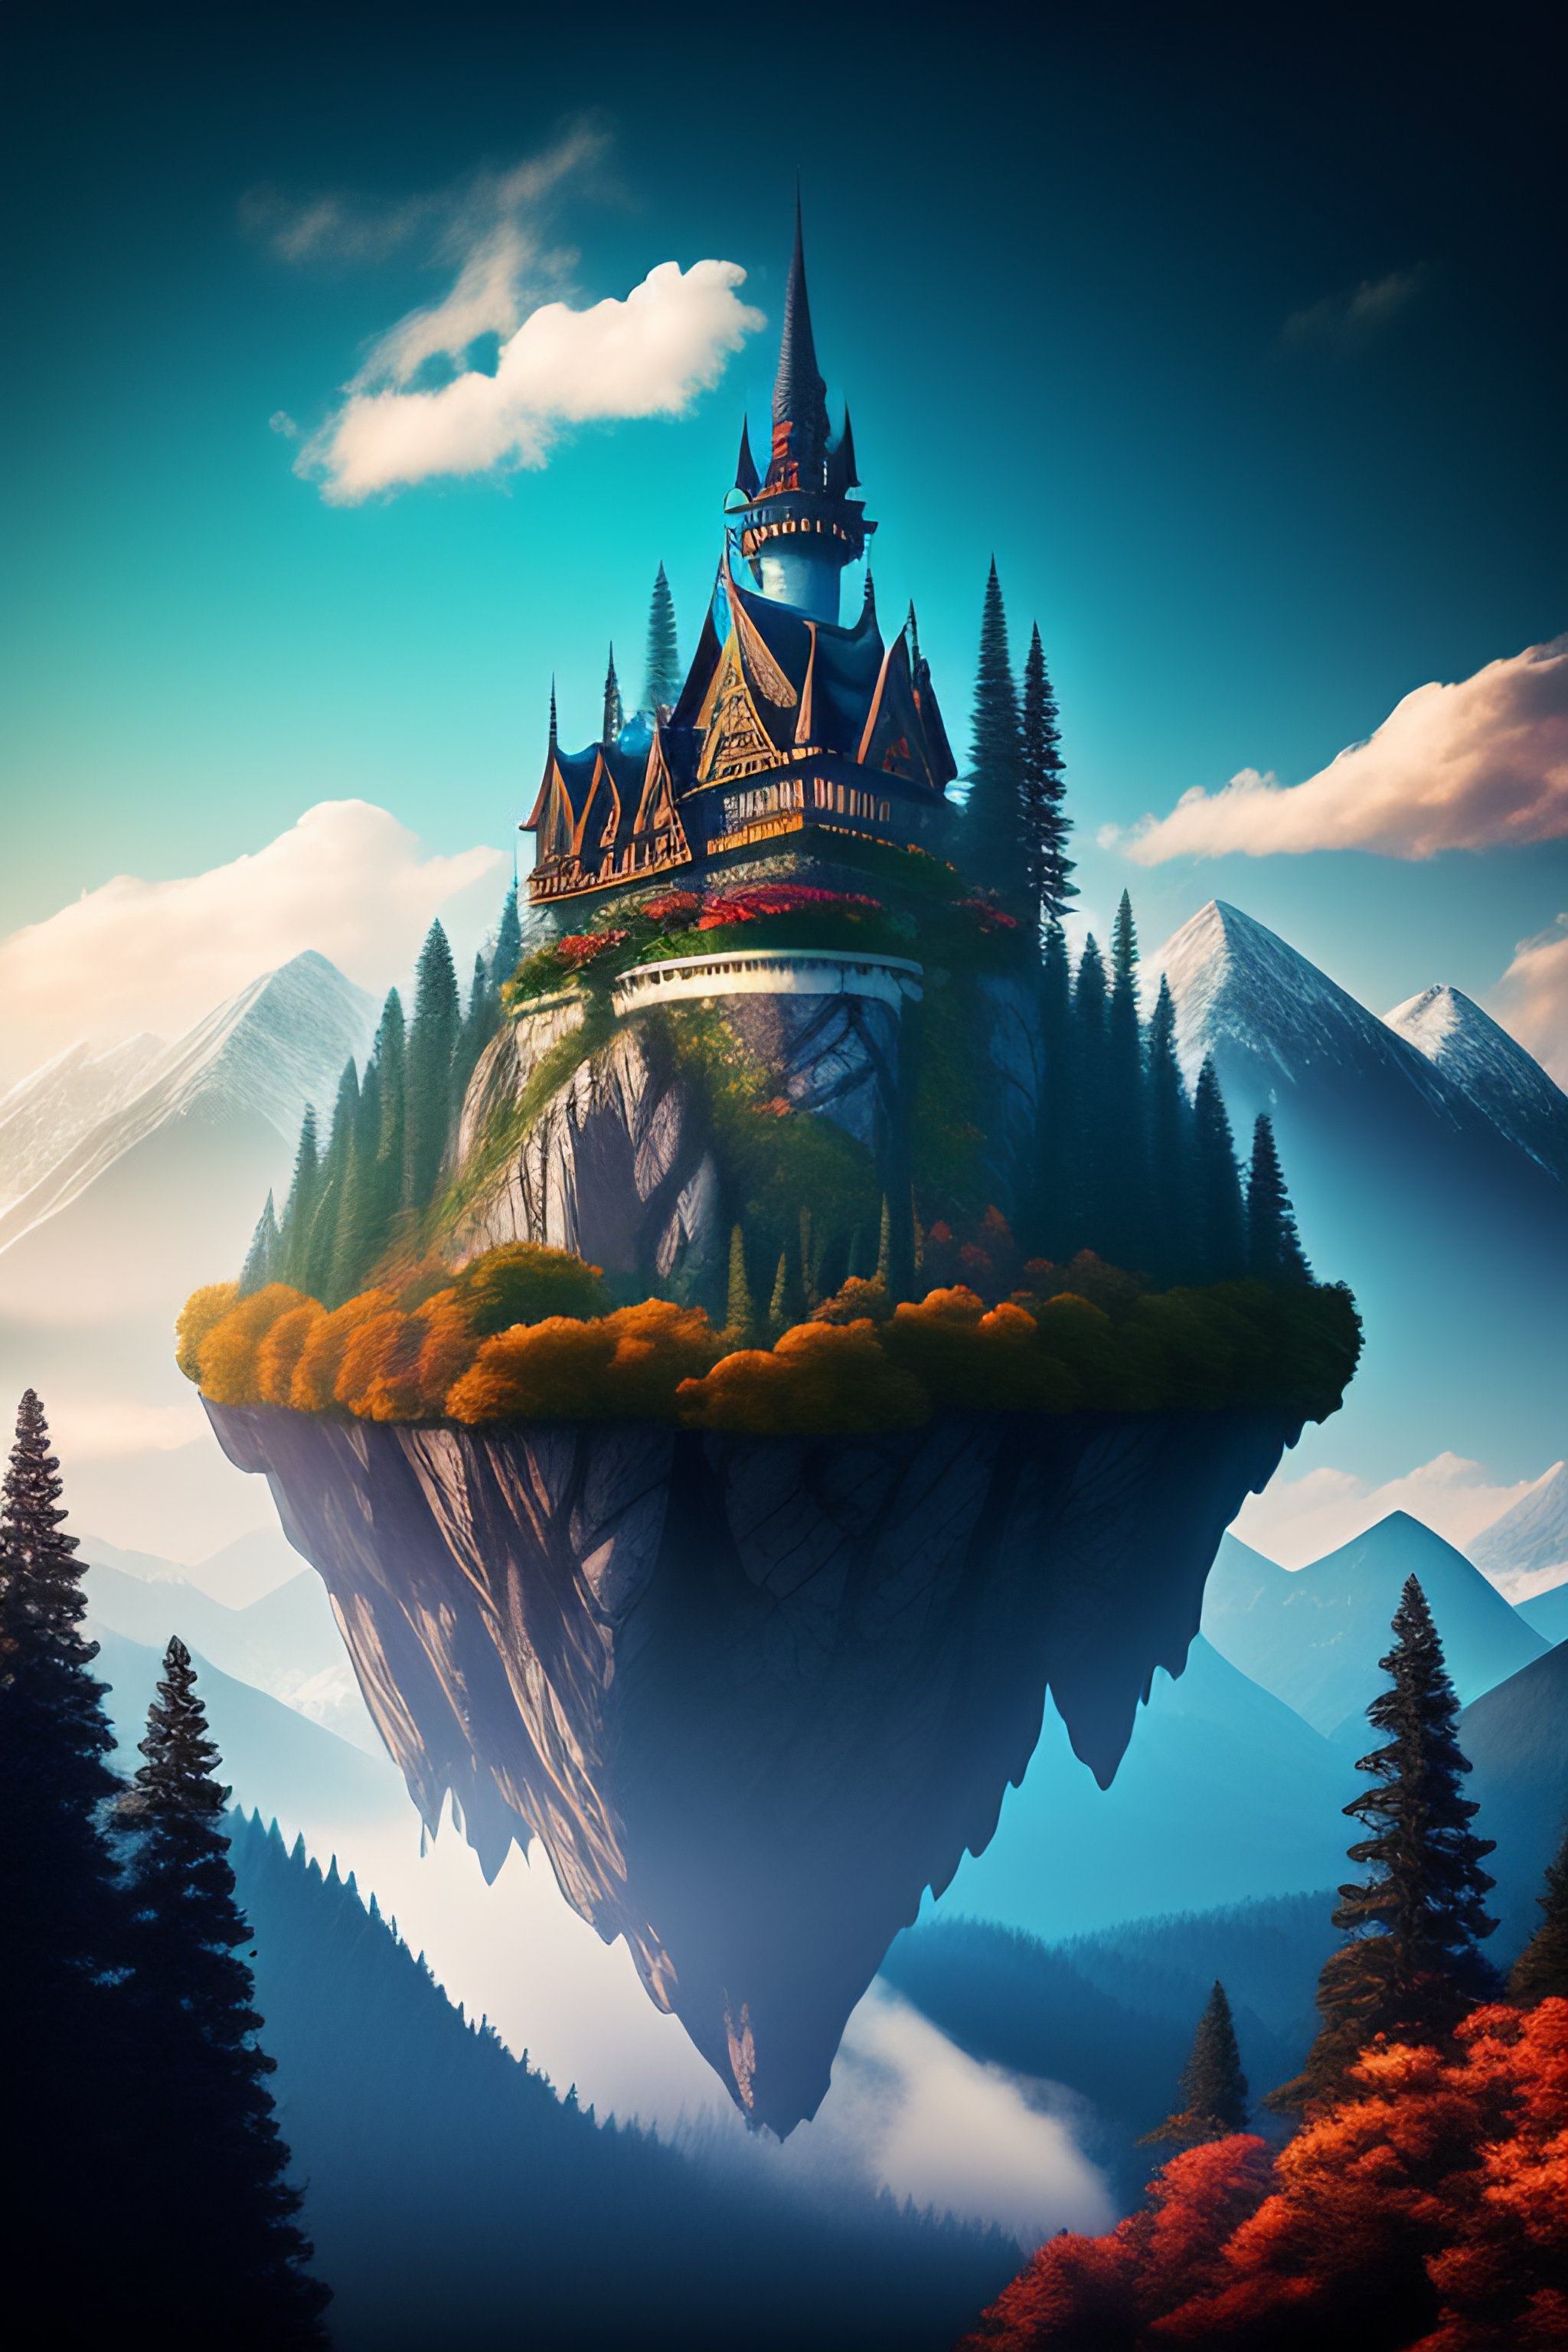 Lexica - Humble wIzard castle floating in the sky with forests and ...